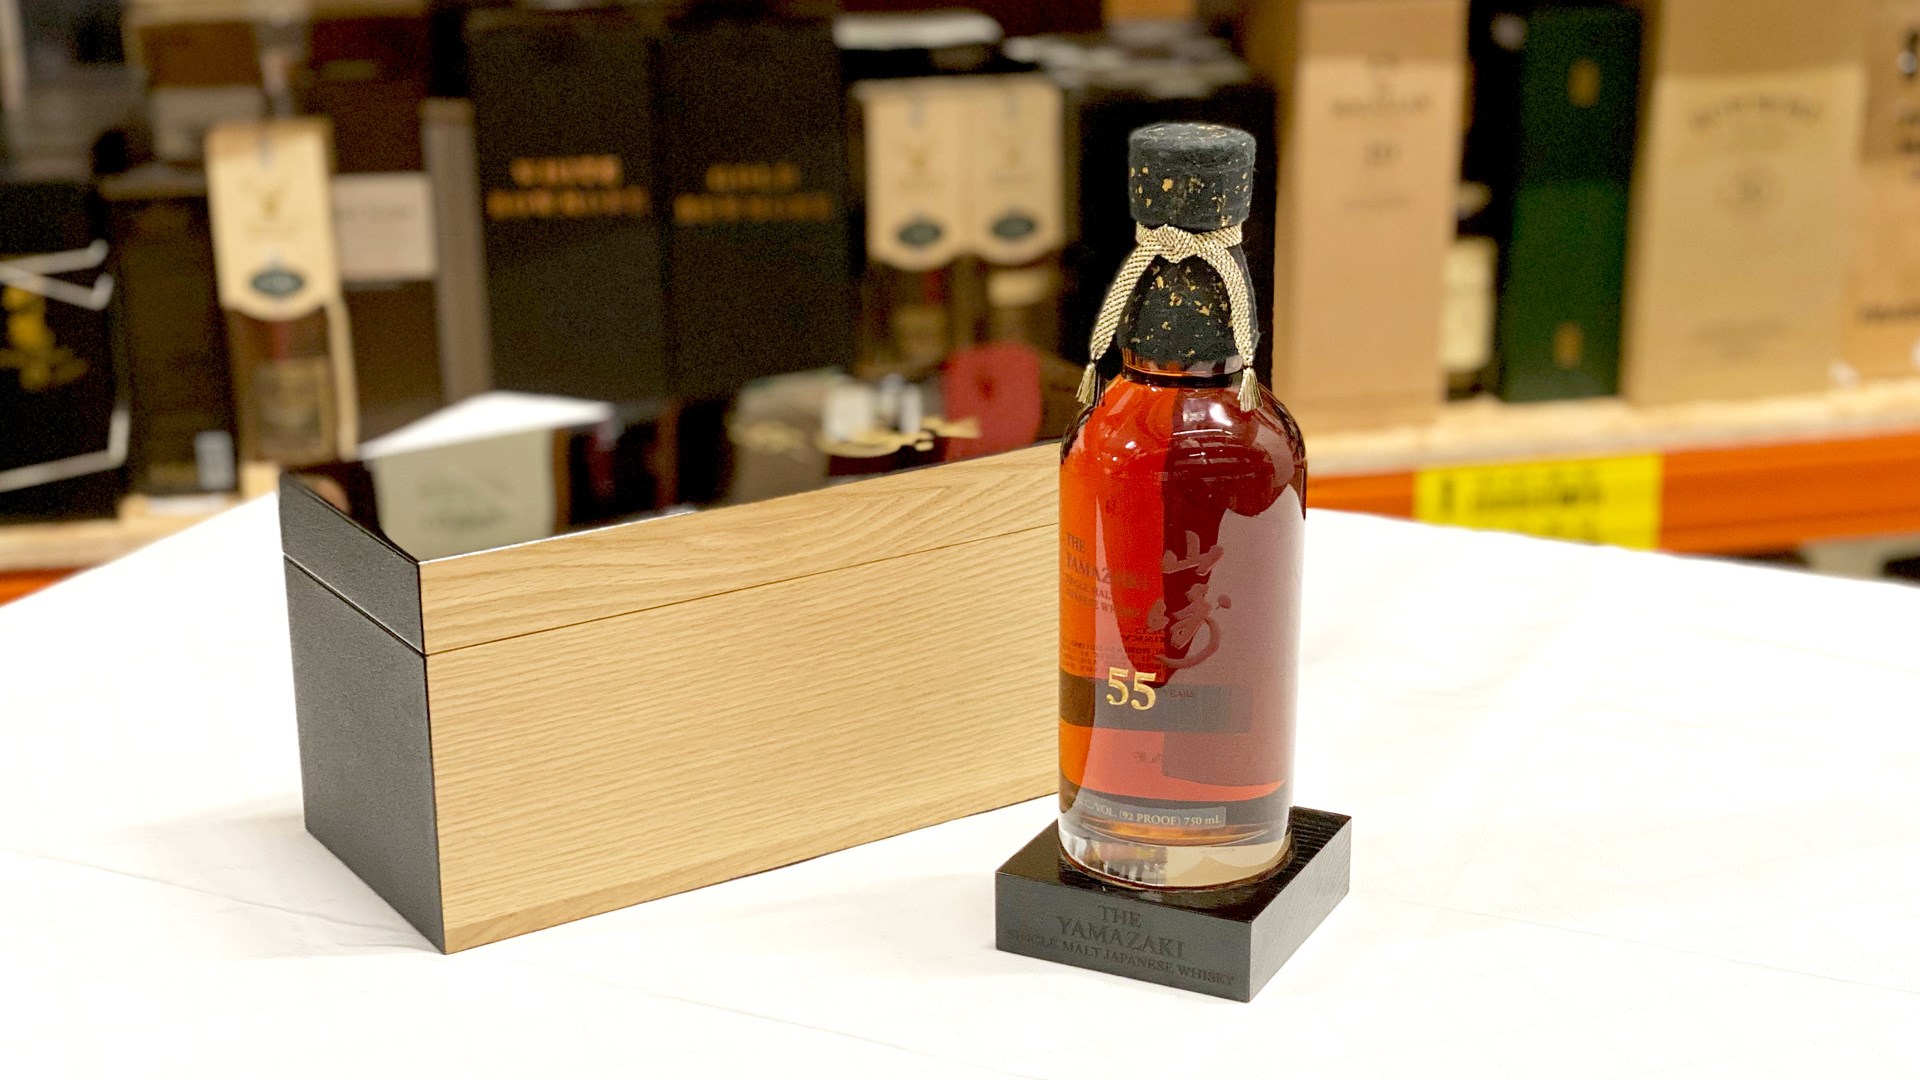 The Yamazaki 55 Years and the case made of Japanese Mizunara wood in the background on the table. 